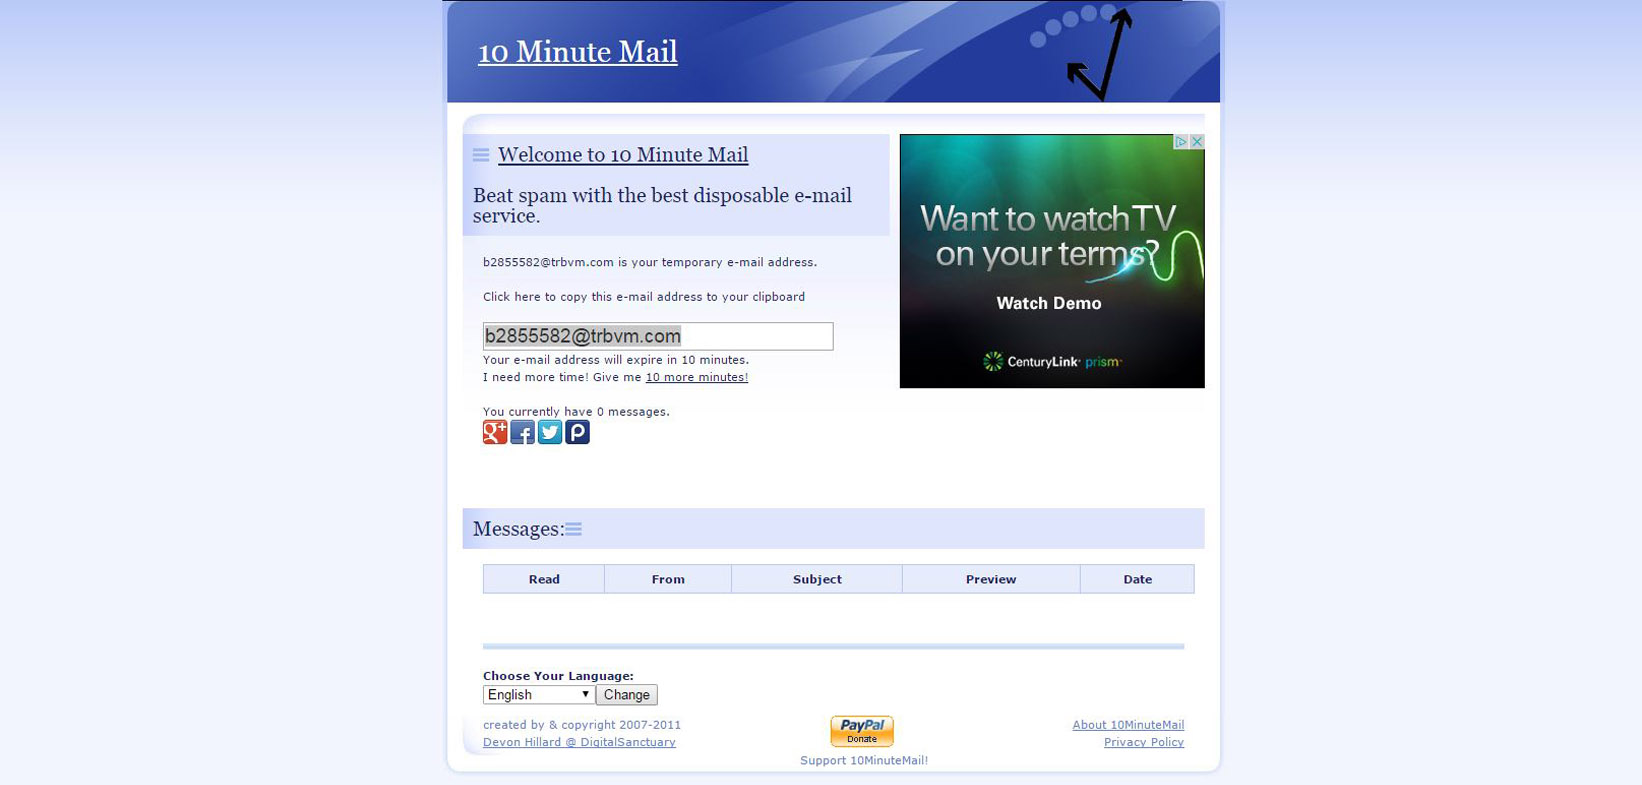 <a href="http://10minutemail.com/10MinuteMail/index.html" target="_blank">10minutemail.com</a> - For those times when you need a quick email-confirmation to download something but don't want to be bombarded with spam every day, check out 10-Minute Mail. This website provides you with an email address that lasts for ten minutes (long enough to get a confirmation), then the address self-destructs. Don't worry, if you need more time, just click the "Ten More Minutes" button.